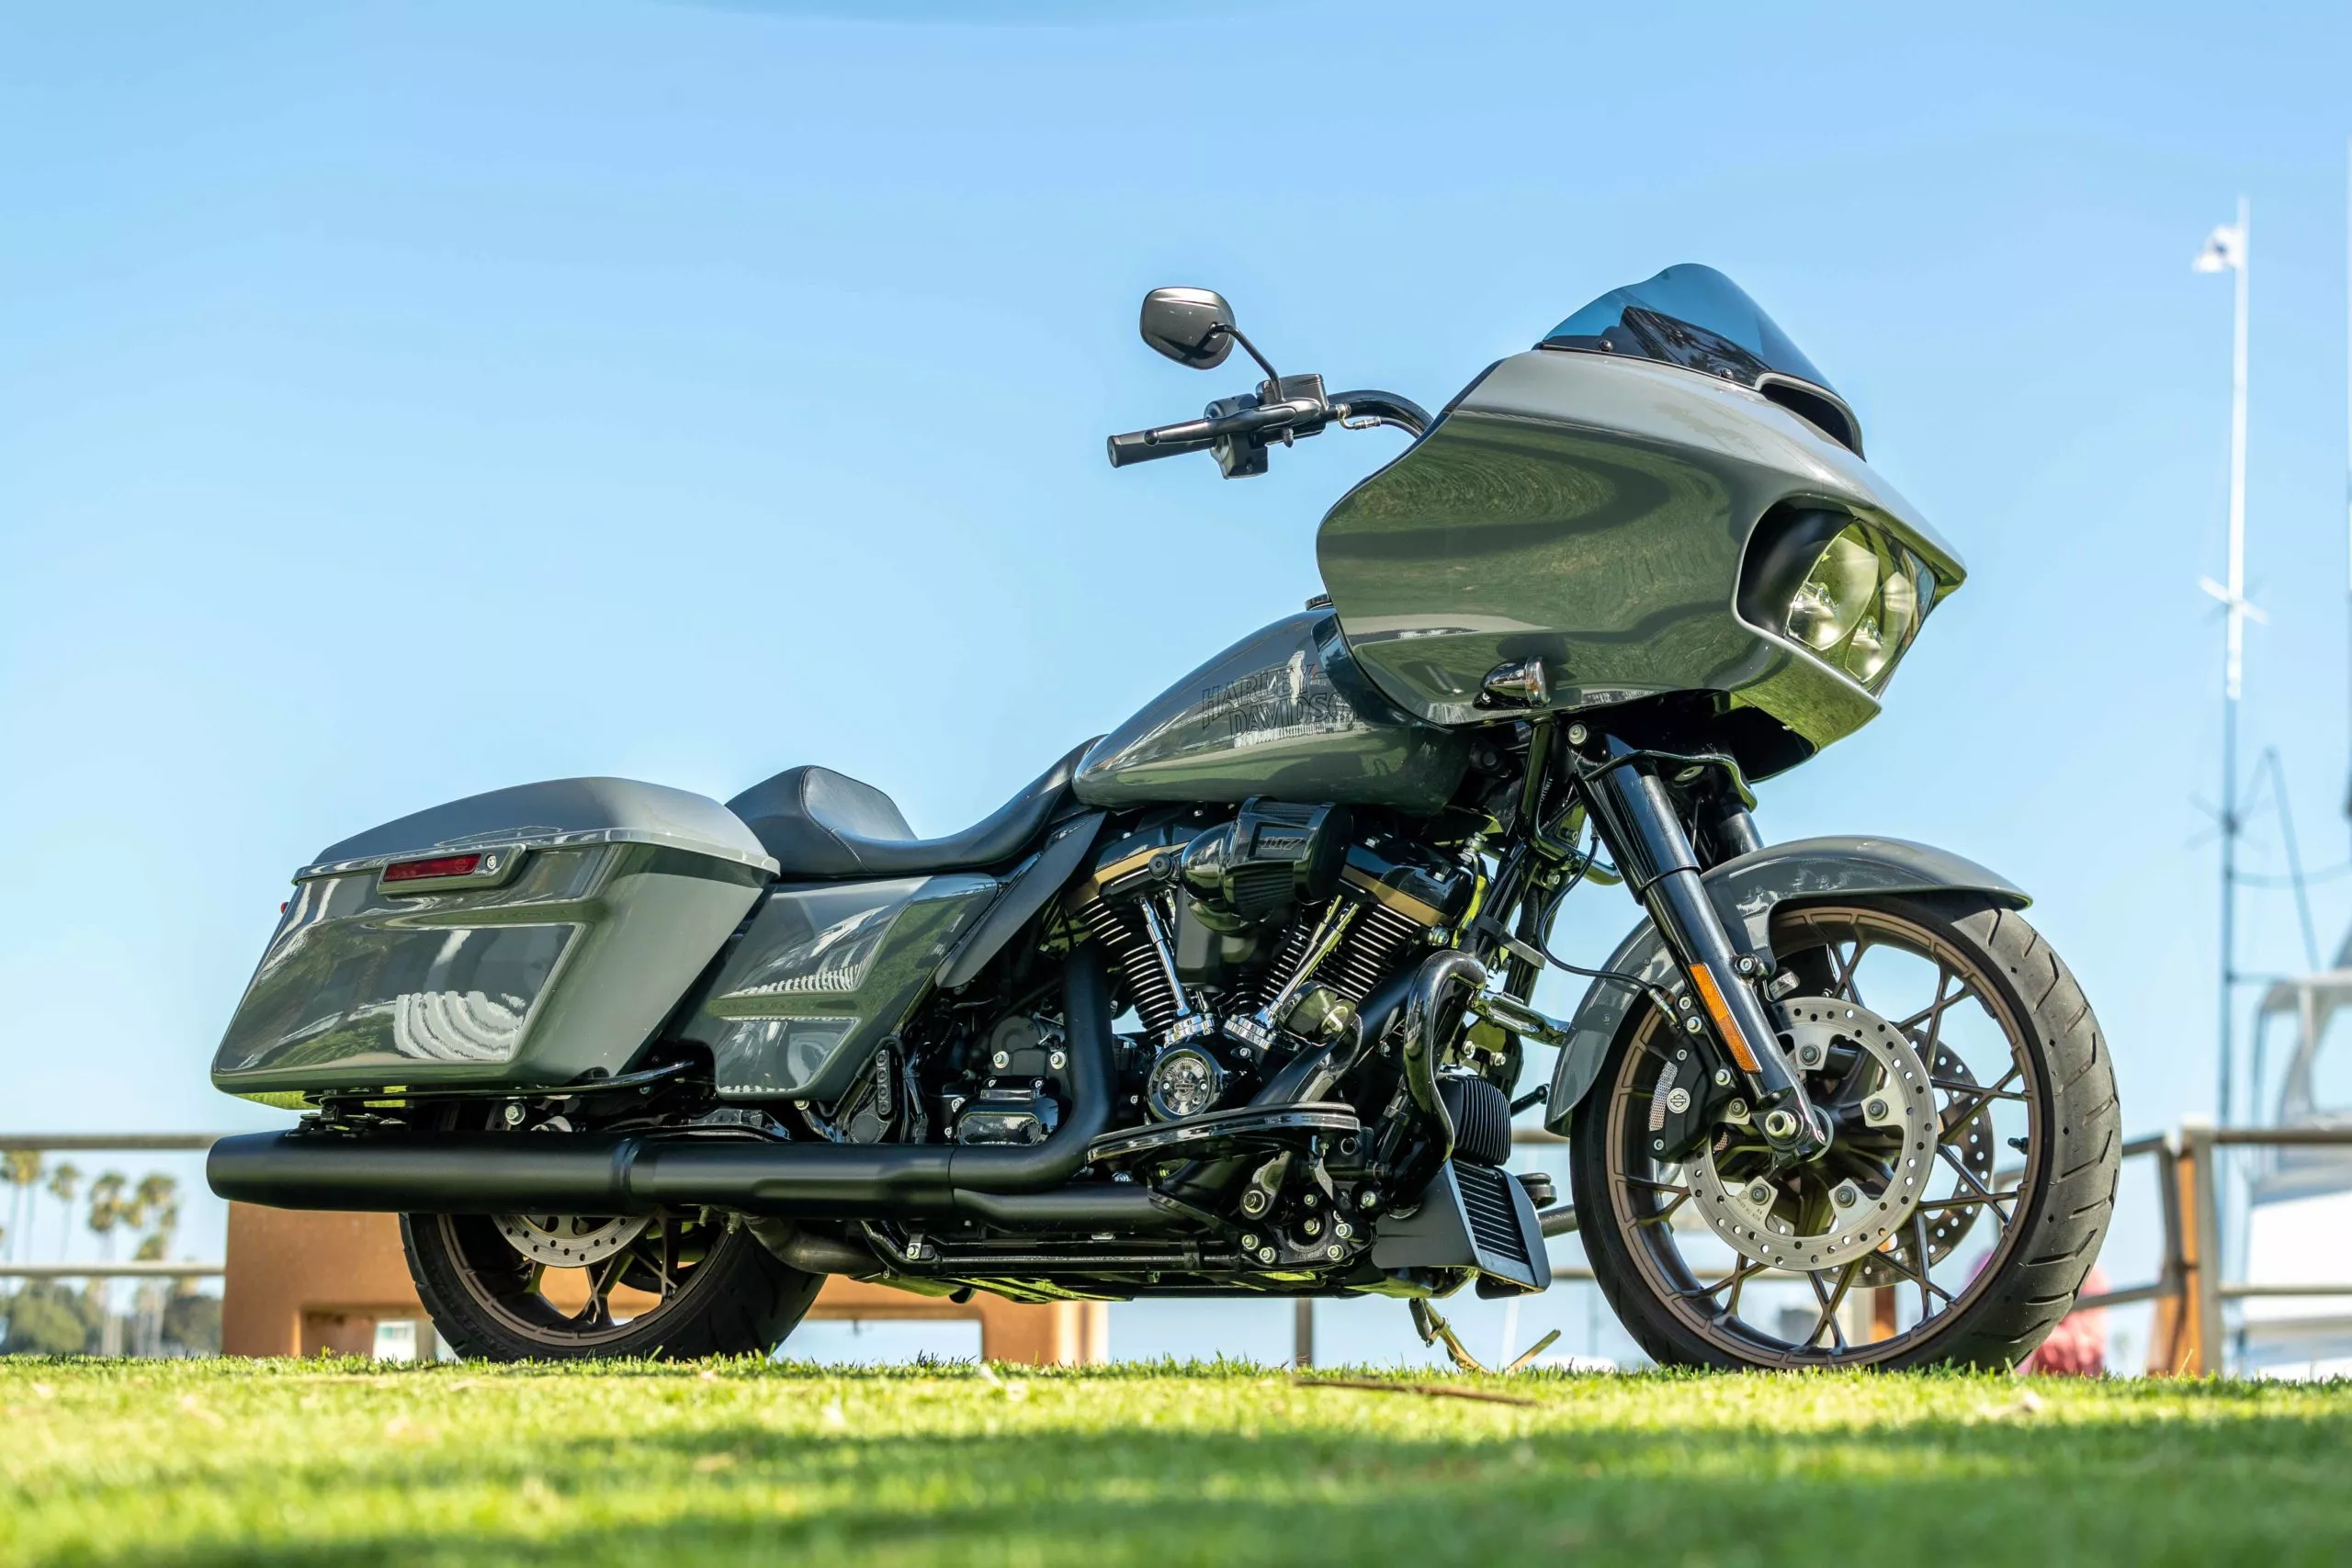 2022 Harley-Davidson Road Glide ST & Street Glide ST First Ride Review